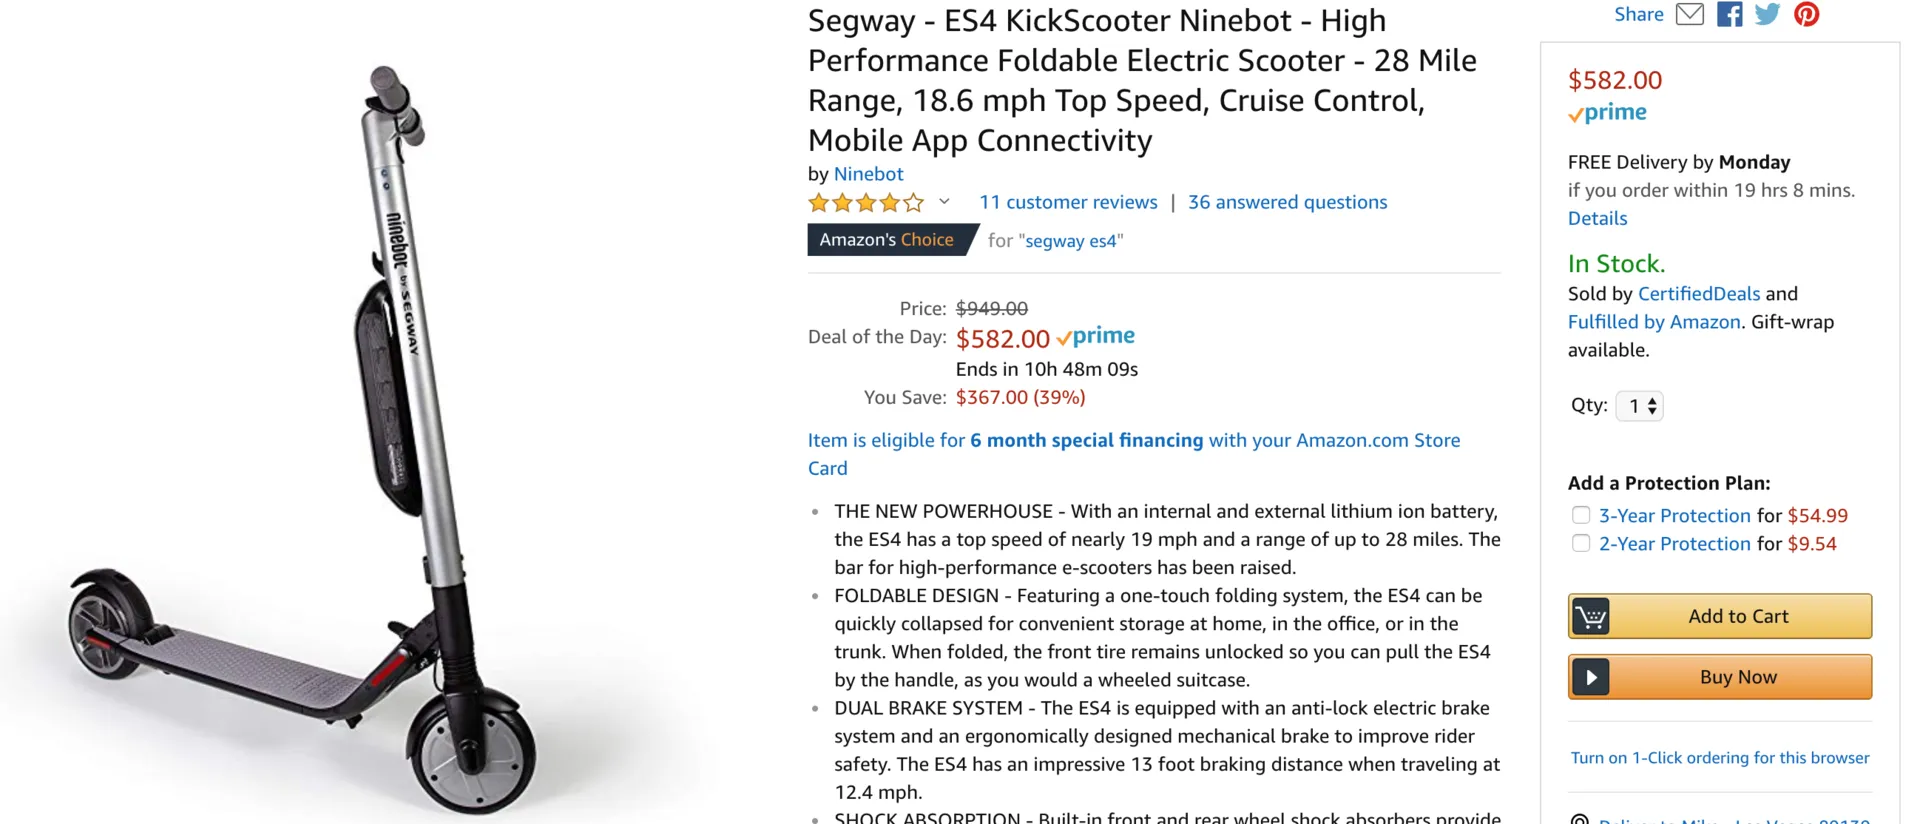 Happy Turkey Day!  Amazon has a Hot Deal on the NineBot Segway ES4